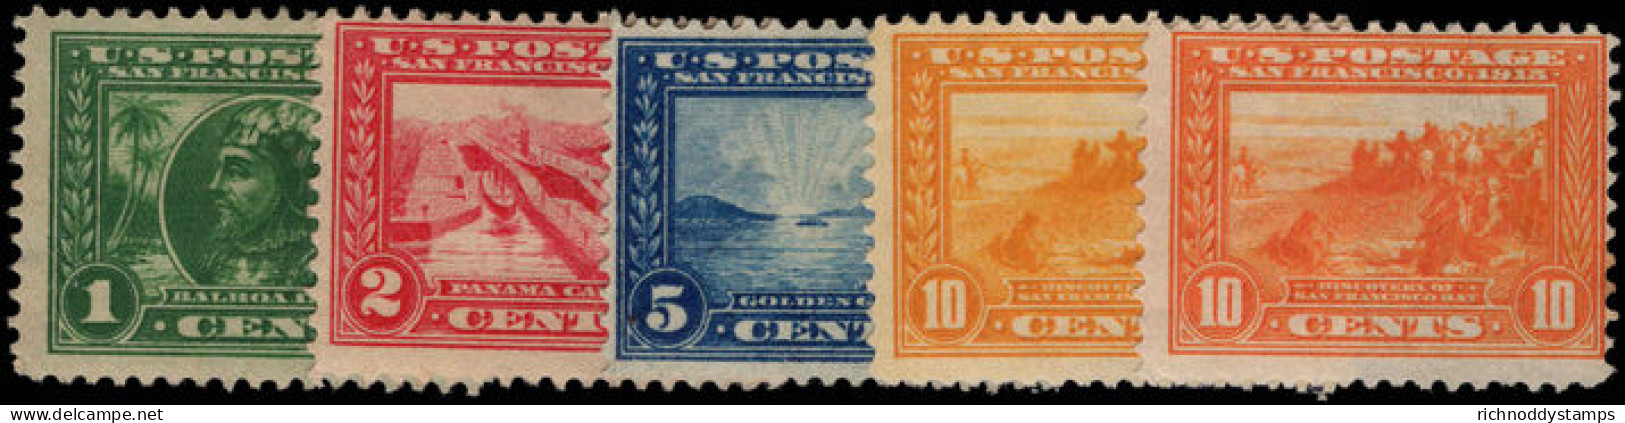 USA 1913 Panama-Pacific Exposition Perf 12 Set Mounted Mint. - Unused Stamps